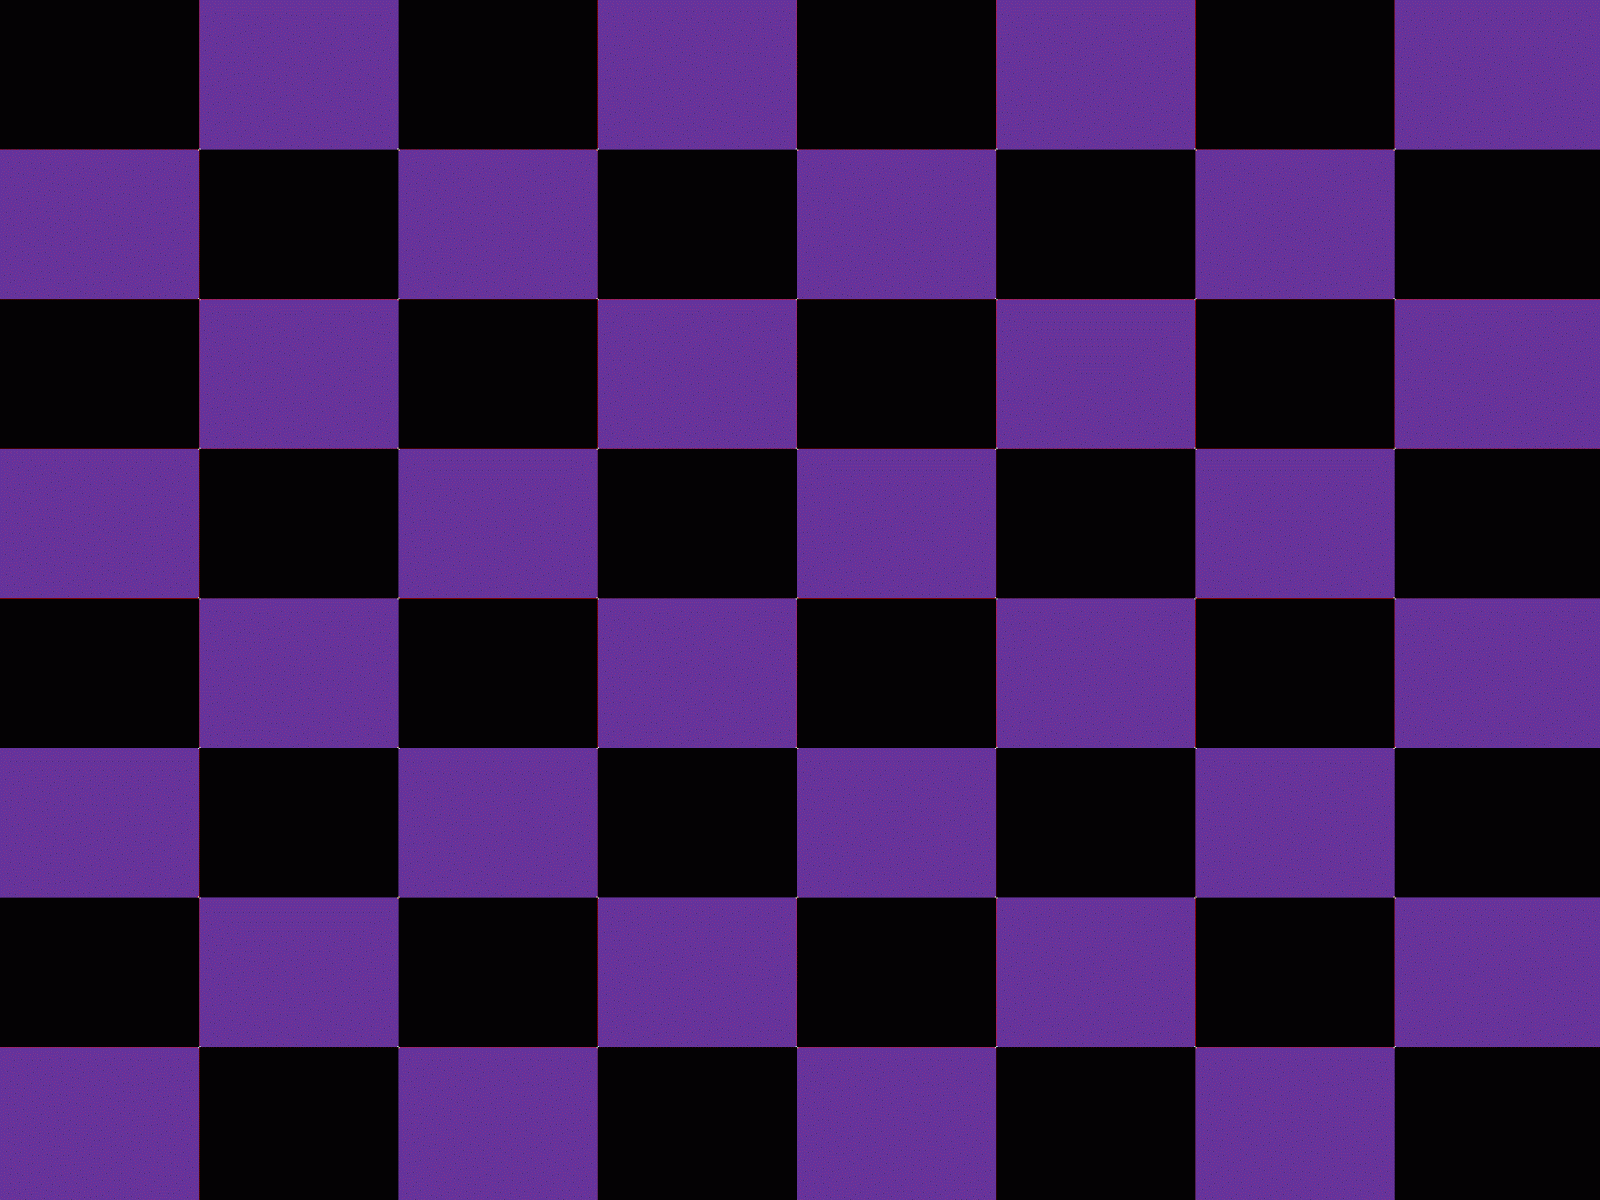 Purple Checkered Wallpapers